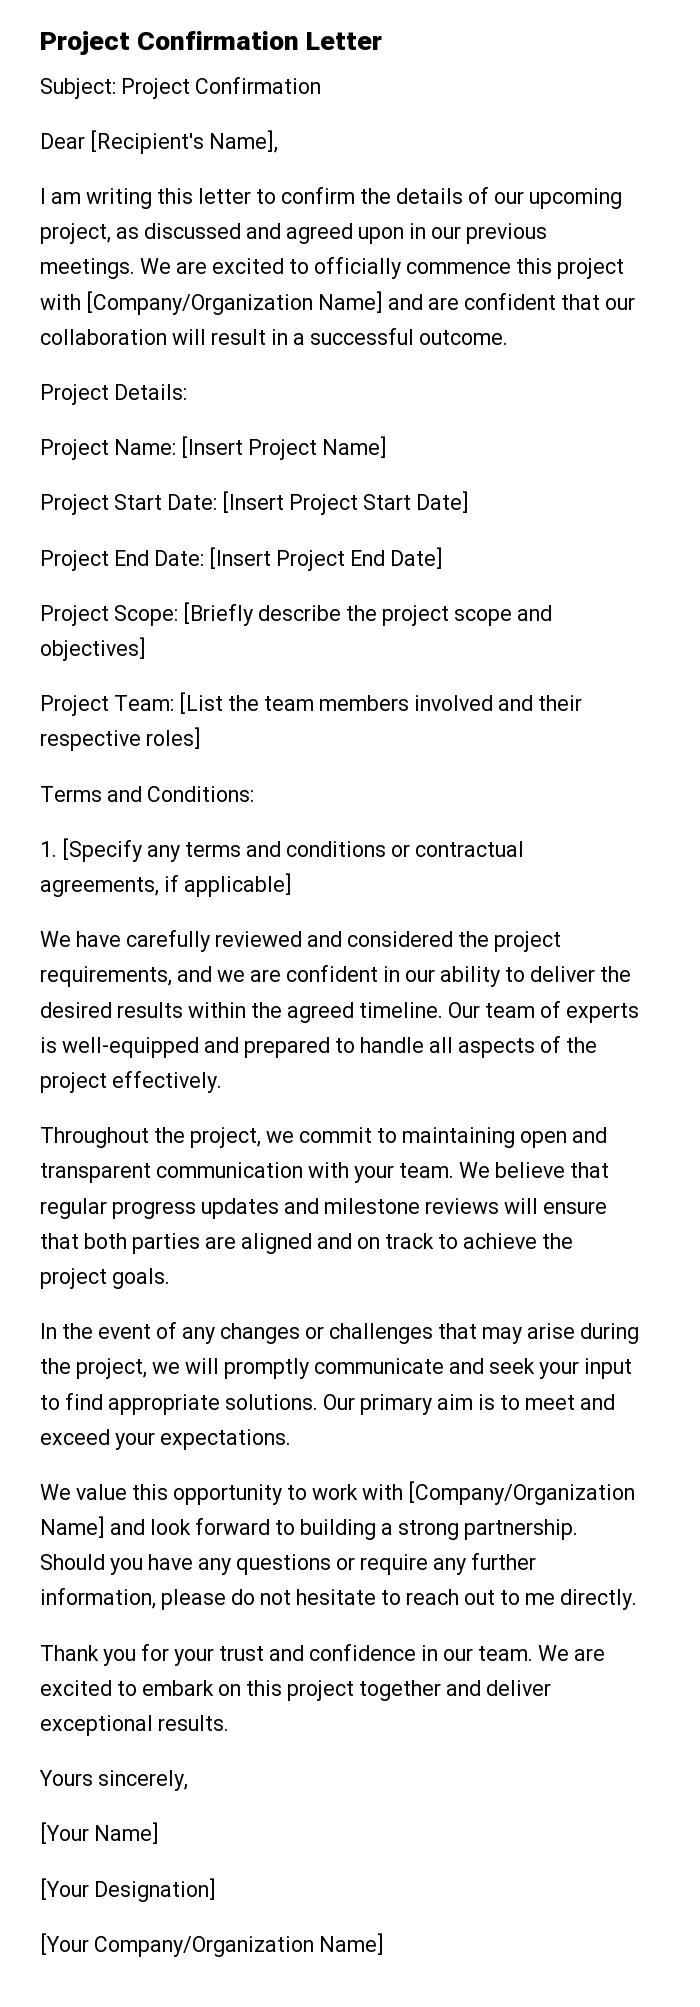 Project Confirmation Letter